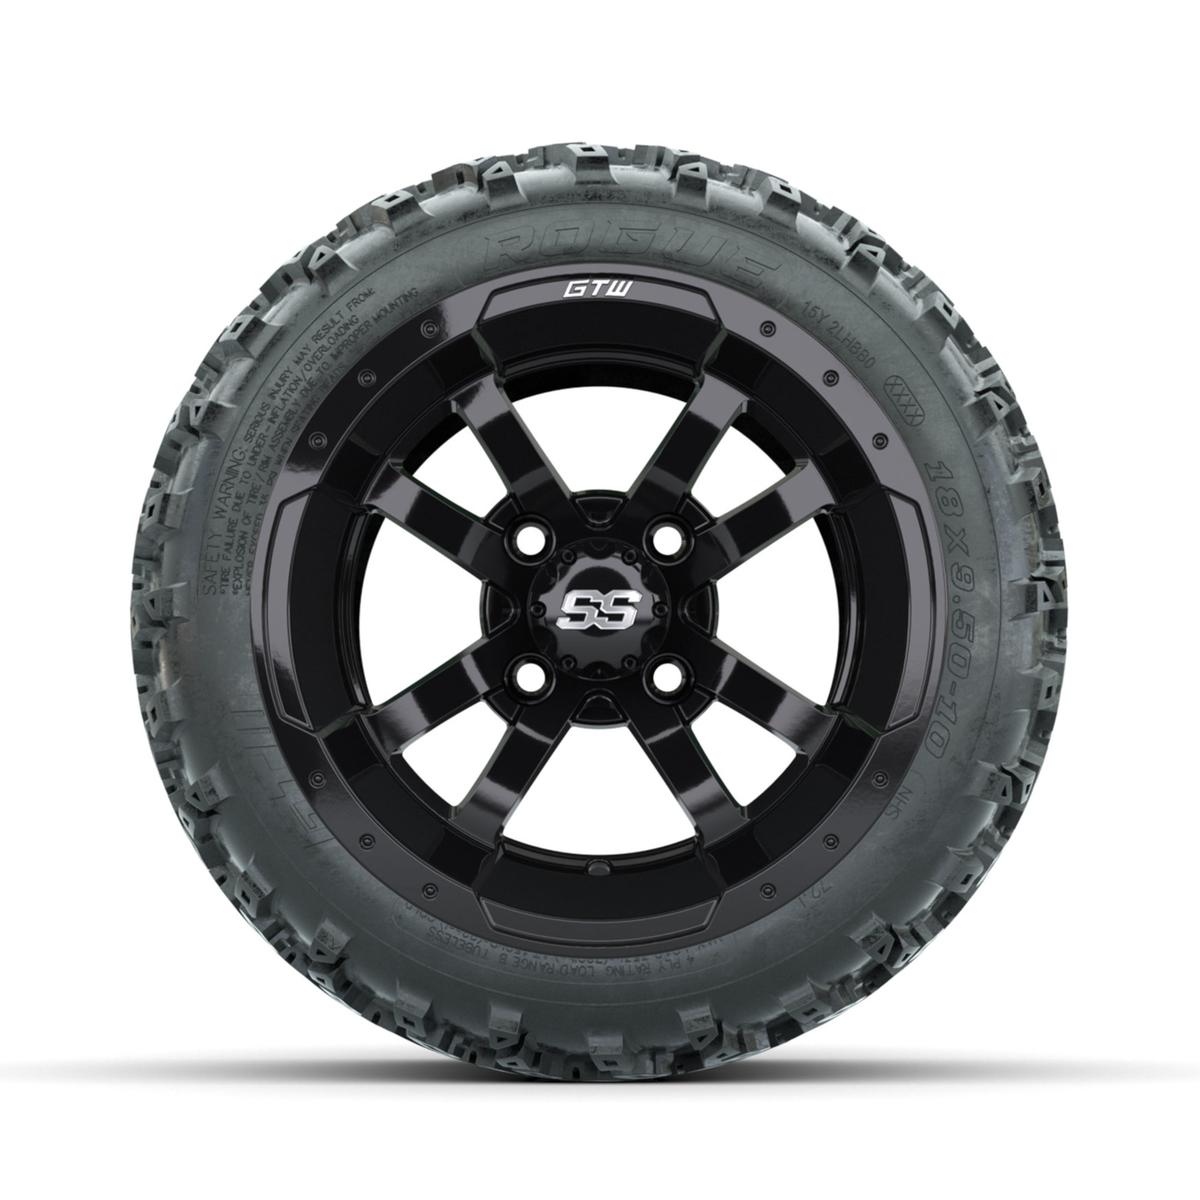 GTW Storm Trooper Black 10 in Wheels with 18x9.50-10 Rogue All Terrain Tires – Full Set